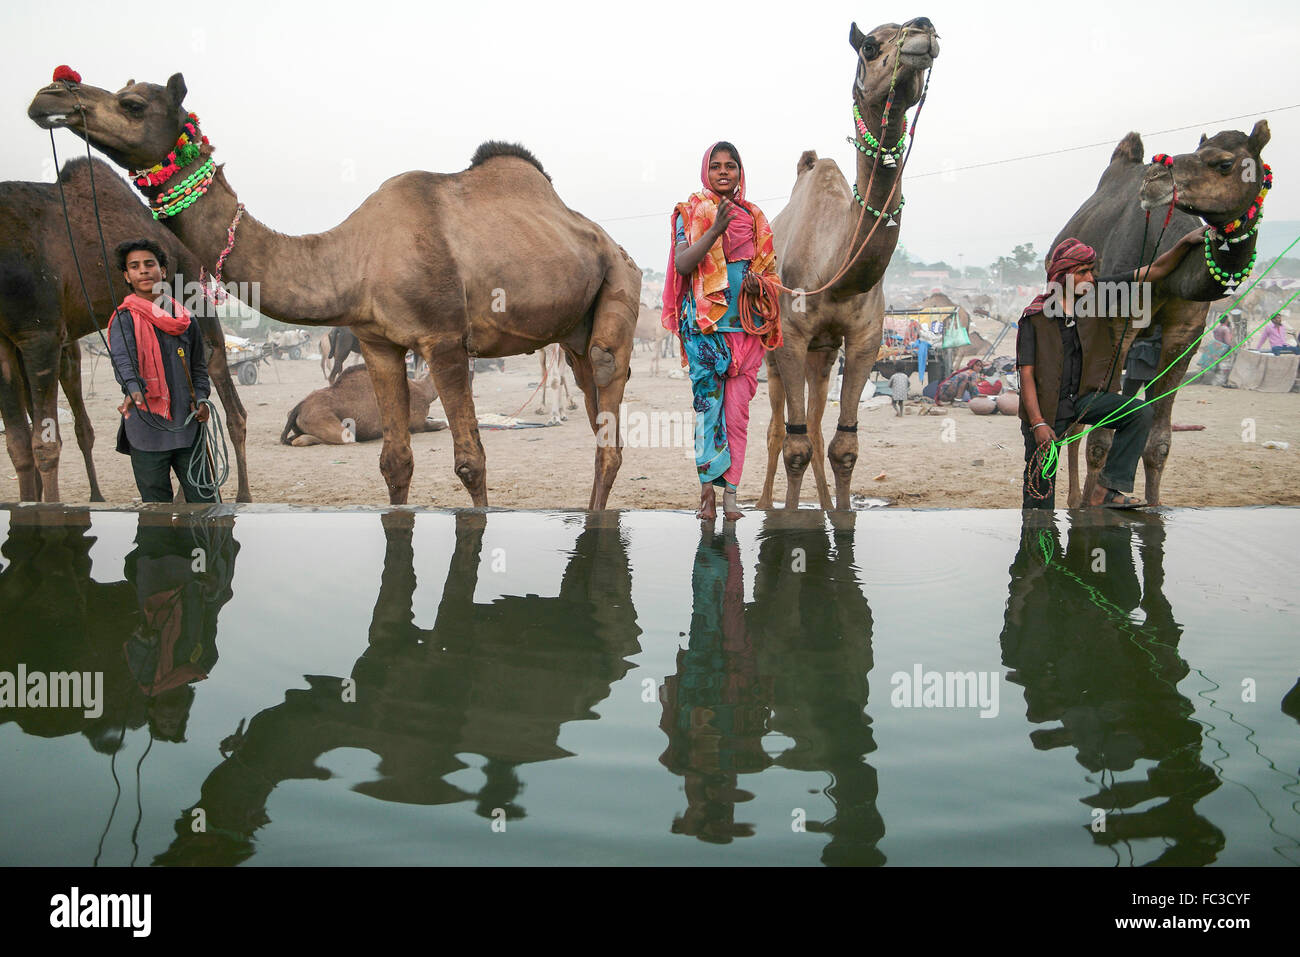 Camel herds or camel trader bring camels during sunset to the watering pool. Stock Photo